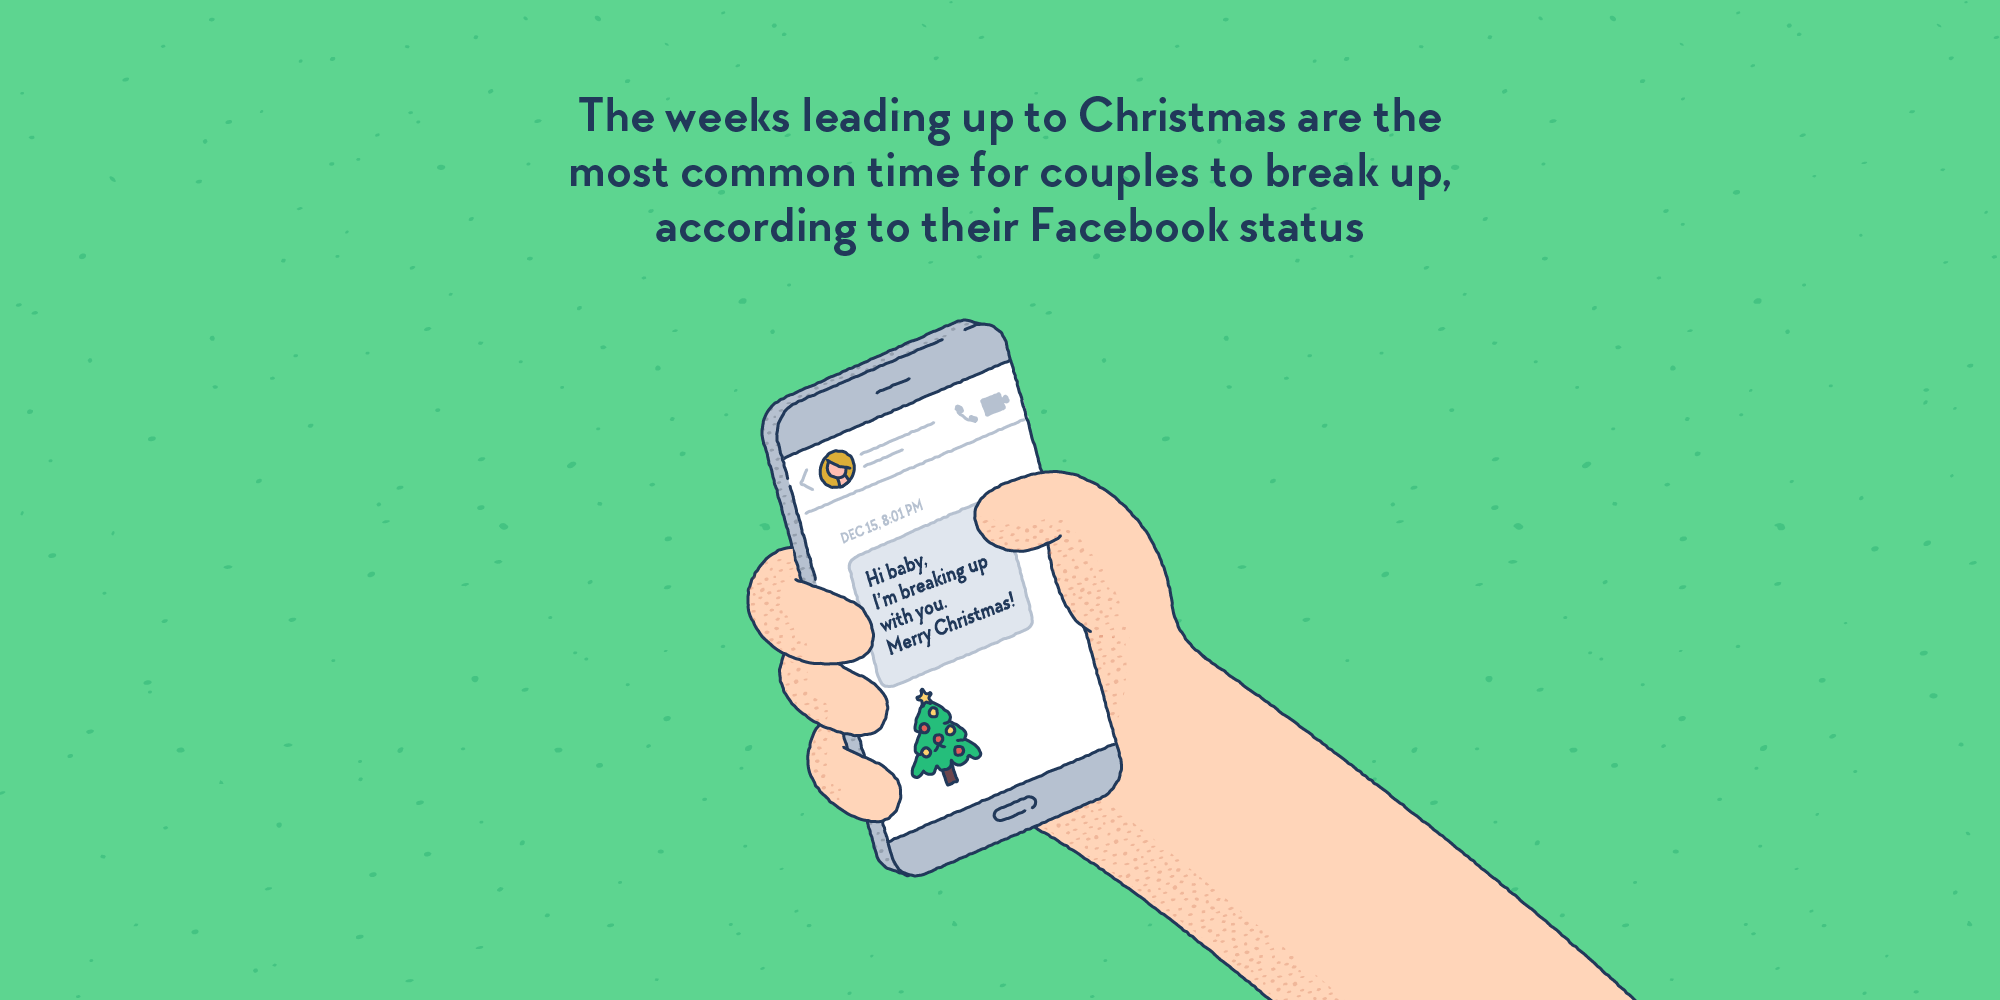 A hand holding a phone. On the screen, a chat conversation is opened, reading: “Hi baby, I’m breaking up with you. Merry Christmas!”, and one Christmas tree emoji.